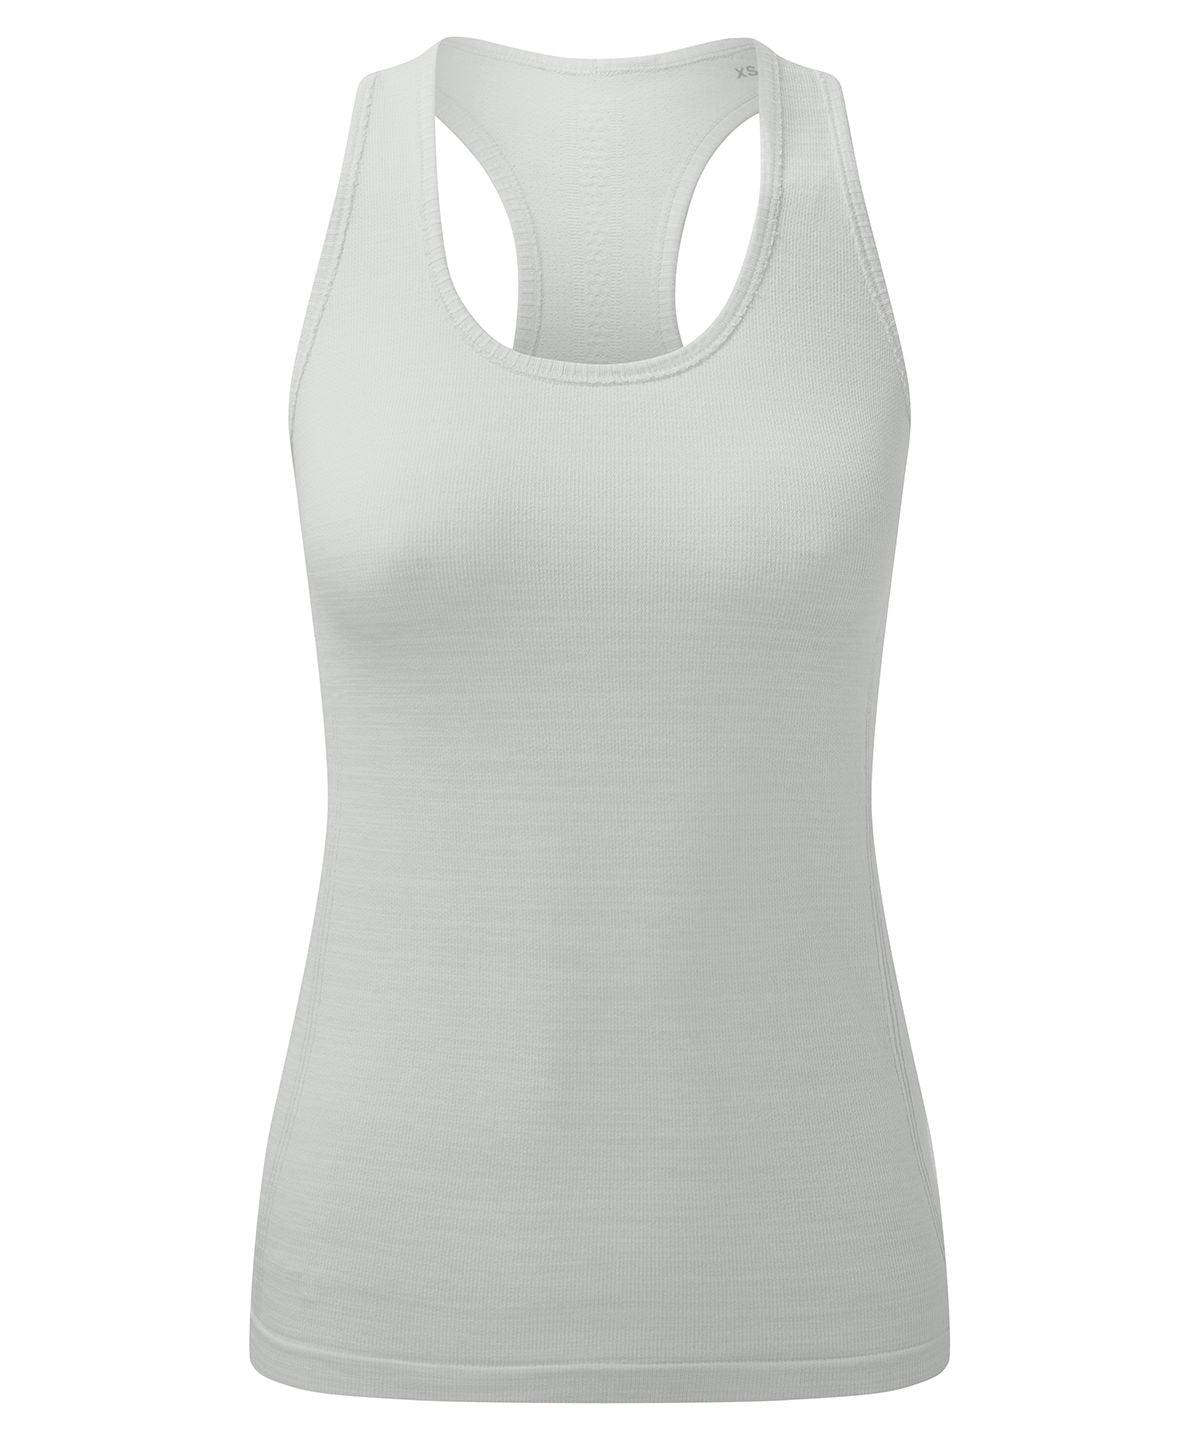 Cool Grey Melange - Women's TriDri® recycled seamless 3D fit multi-sport flex vest Vests TriDri® Activewear & Performance, Back to the Gym, Co-ords, Exclusives, New Styles For 2022, Organic & Conscious, Women's Fashion Schoolwear Centres